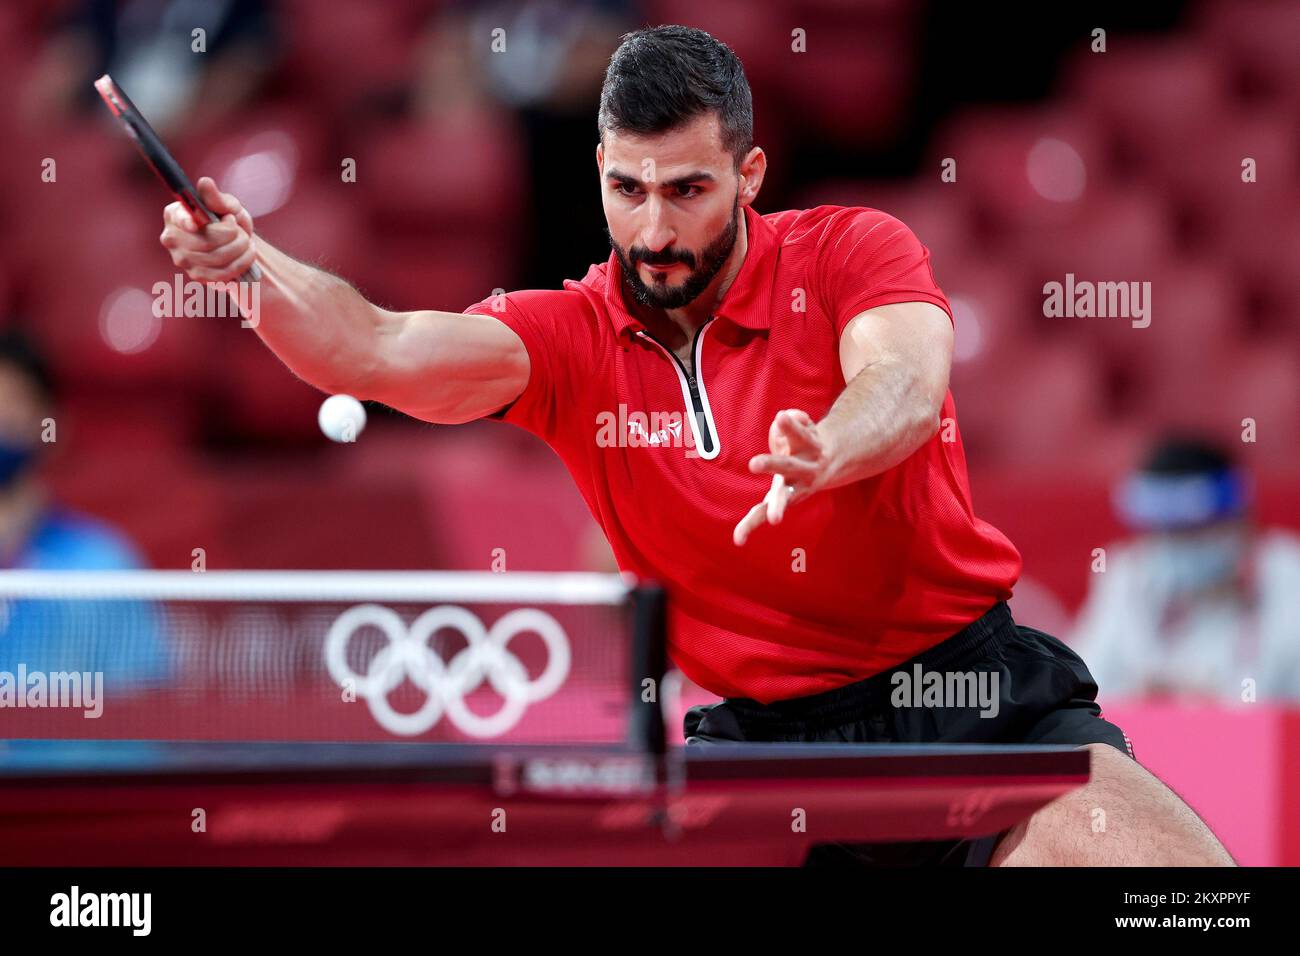 Andrej Gacina during the match against Kokou Dodji Fanny in Tokio on July  24, 2021. Croatian table tennis player Andrej GaÄ‡ina defeated Kokou Dodji  Fanny from Toga in the 1st round of